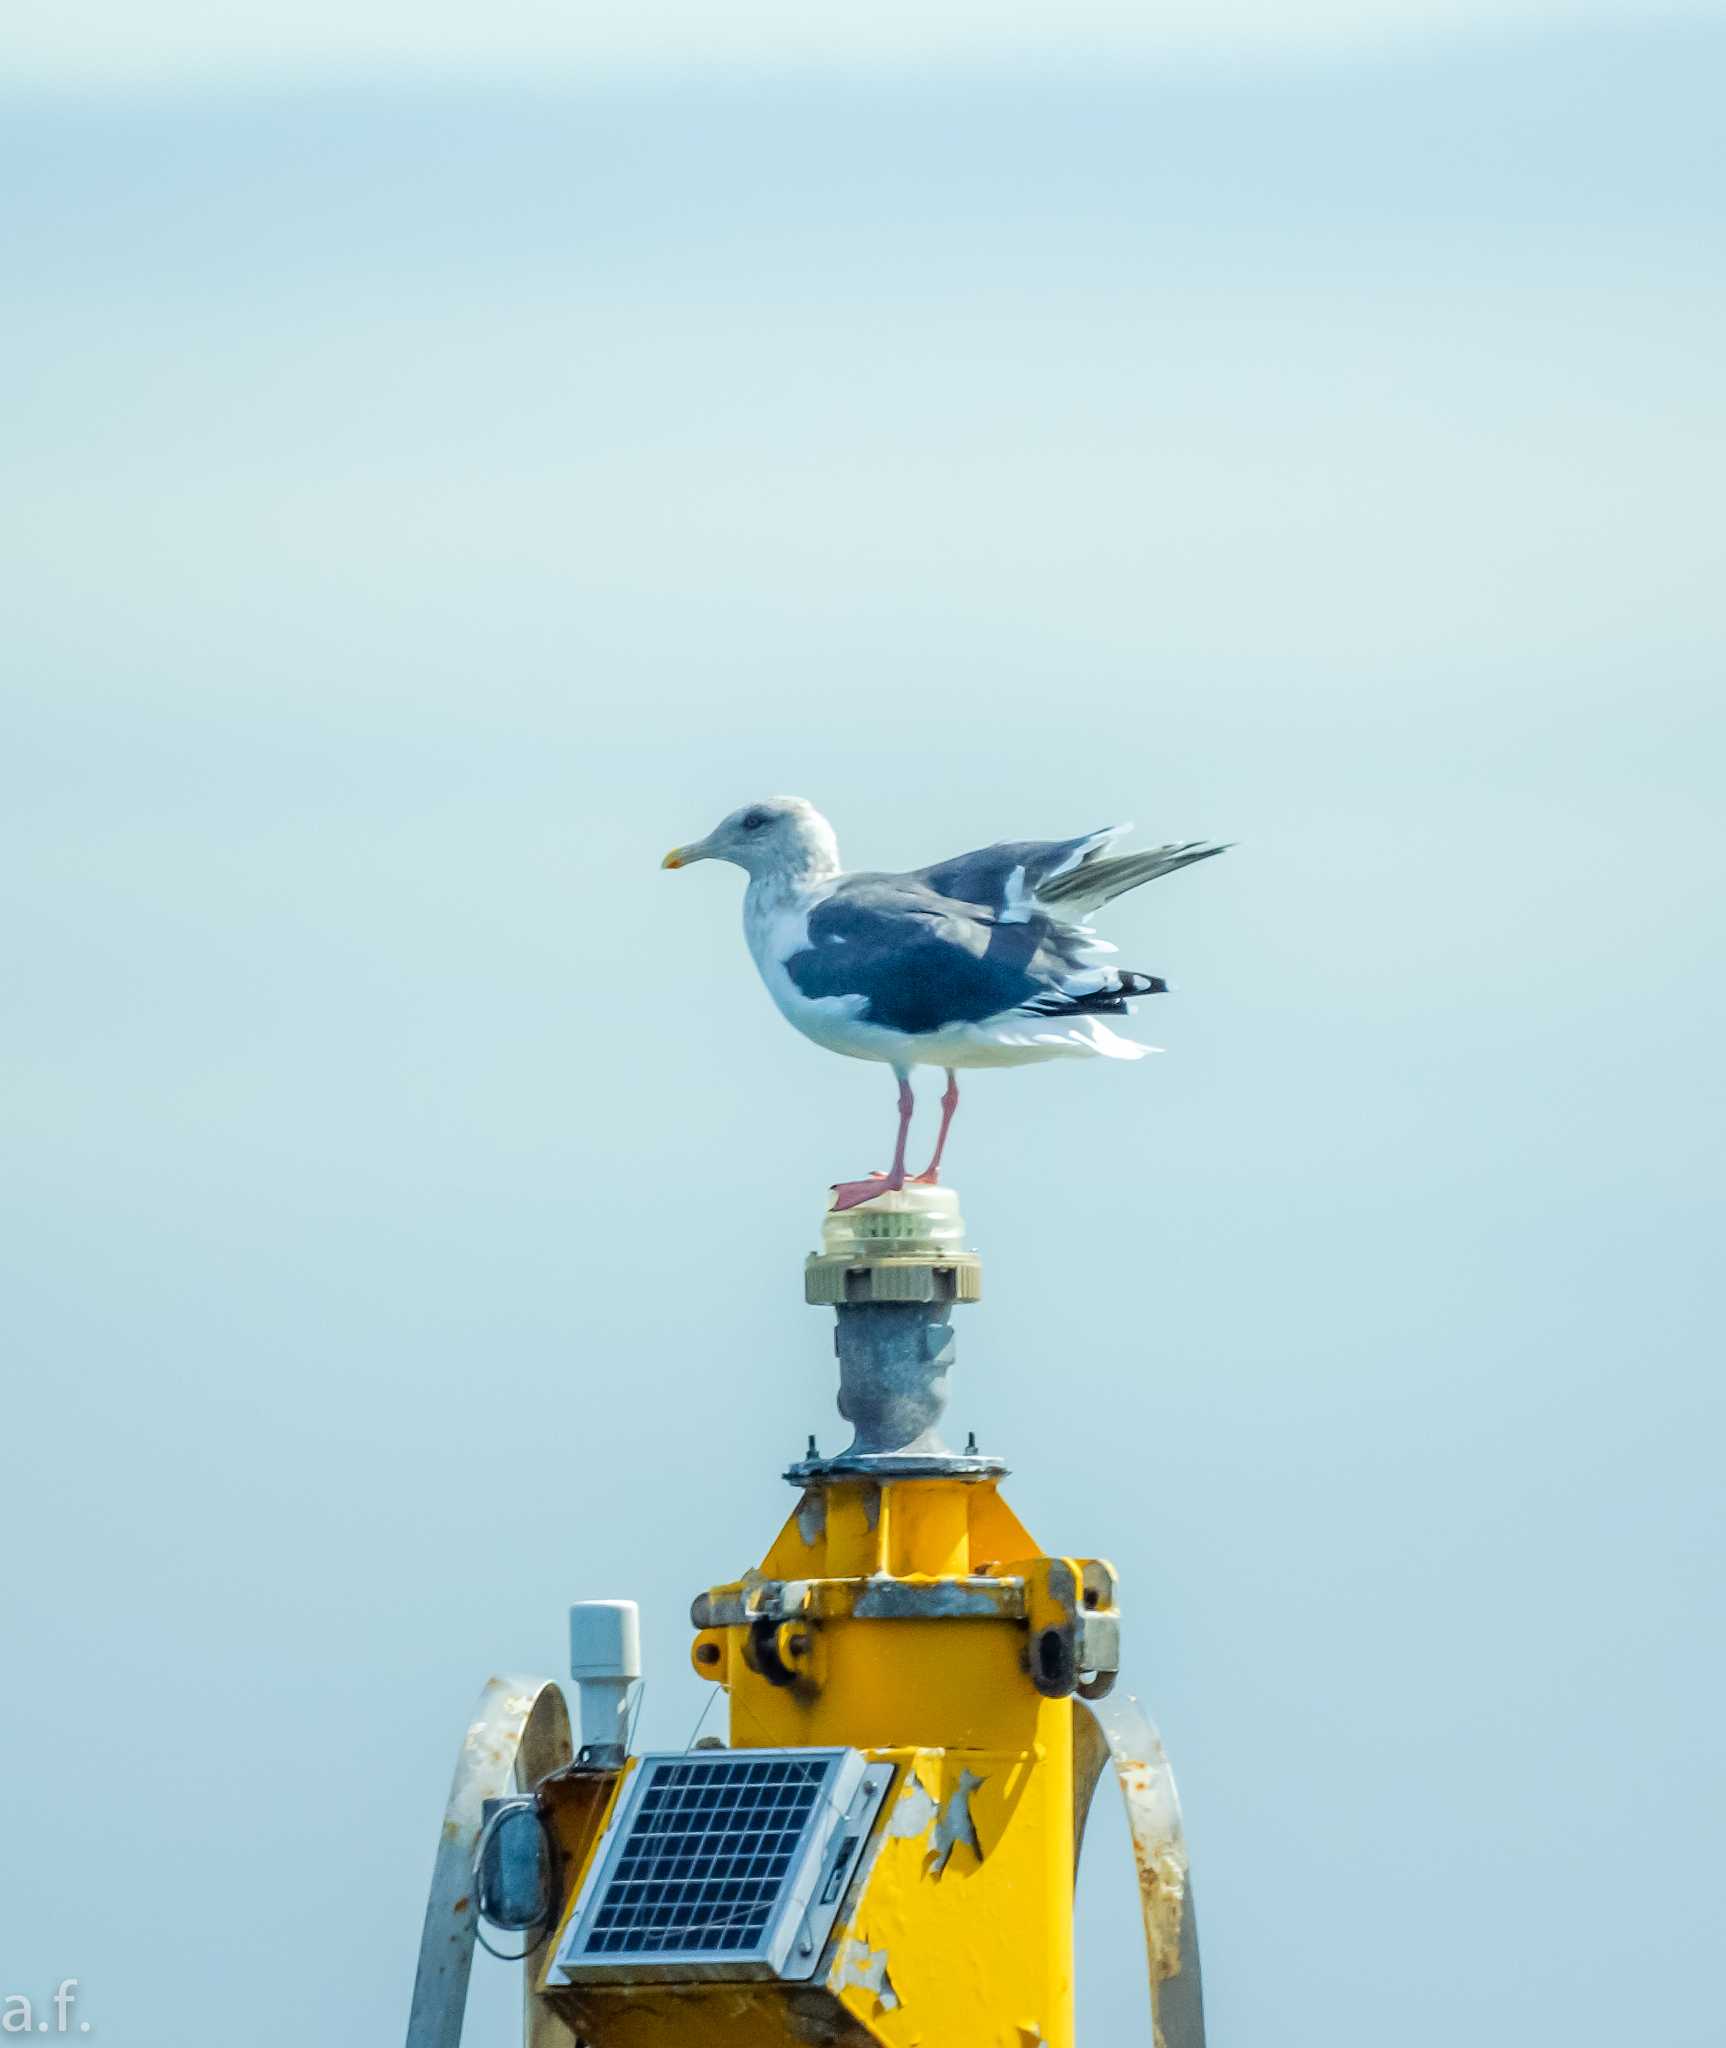 Photo of Black-tailed Gull at 城南島海浜公園 by a.f.